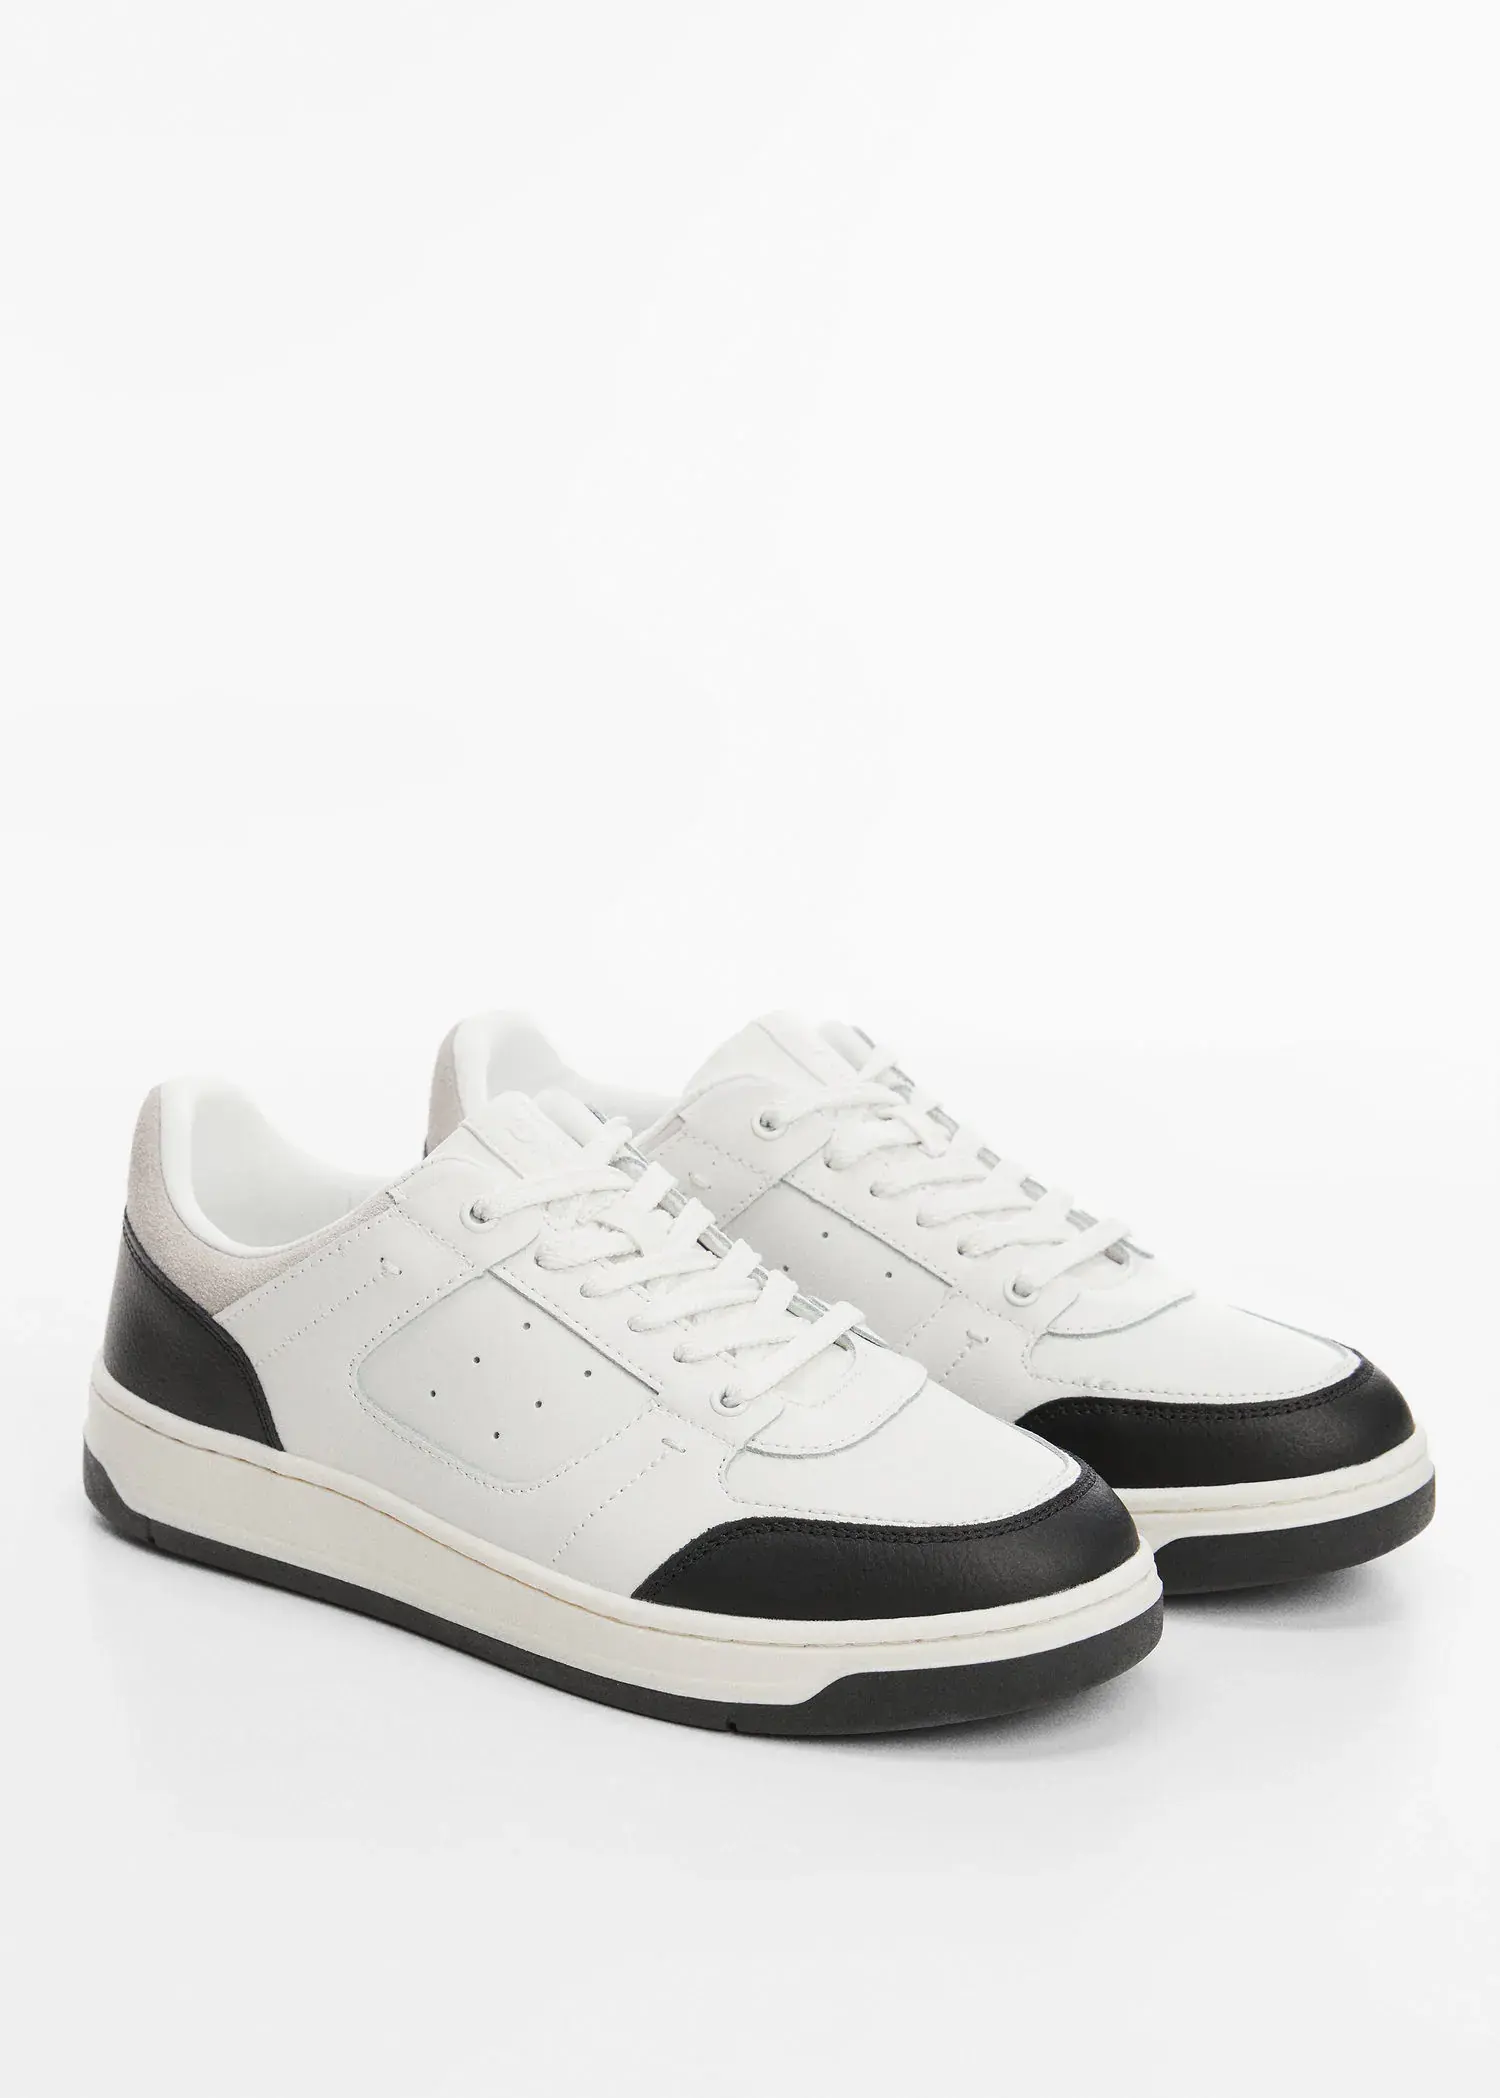 Mango Combined leather trainers. 1